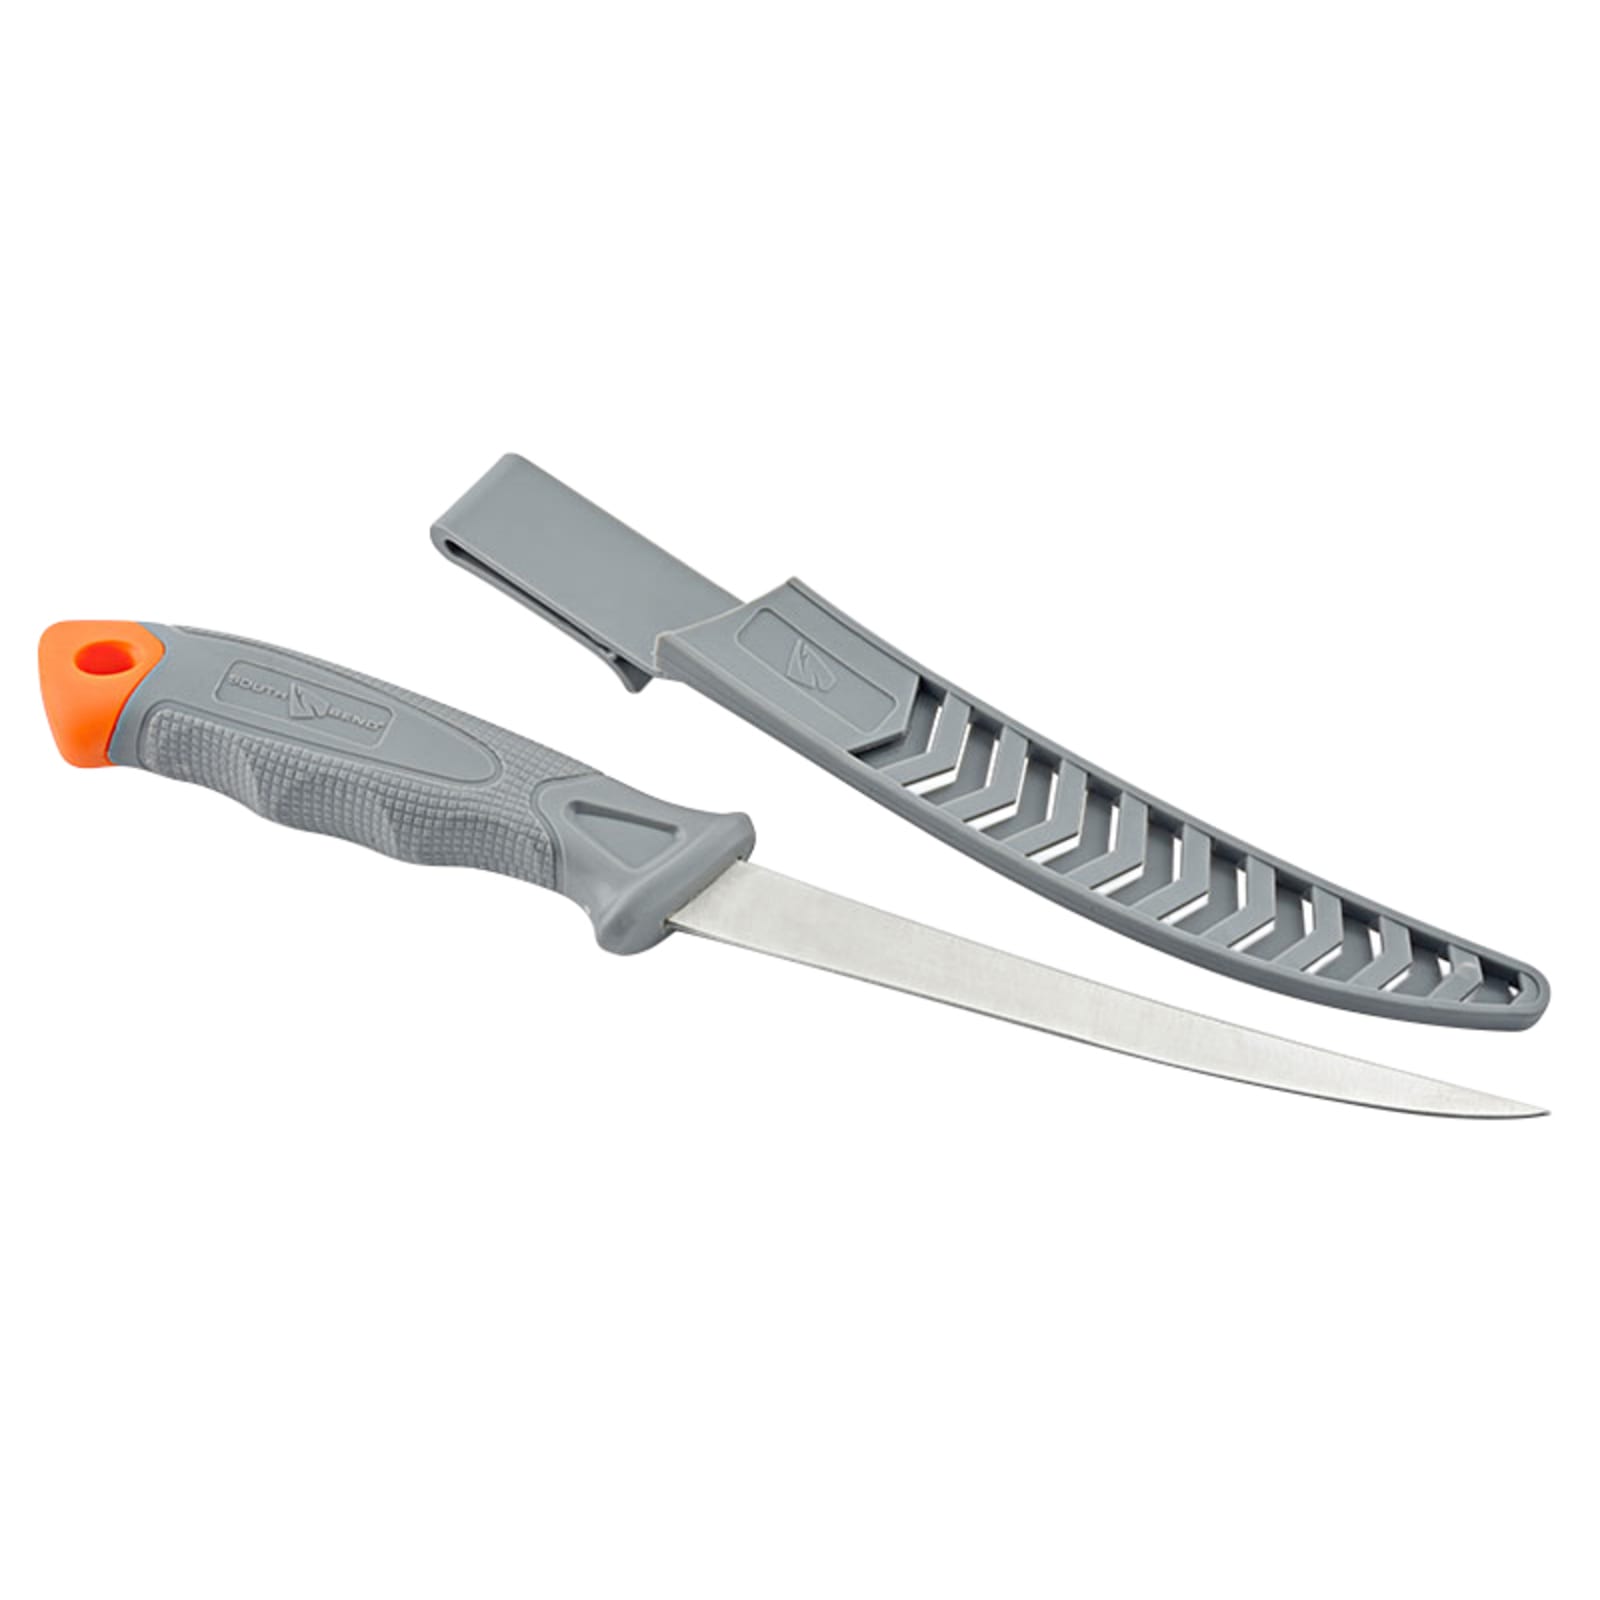 Floating Fillet Knife - 6 In. by South Bend at Fleet Farm